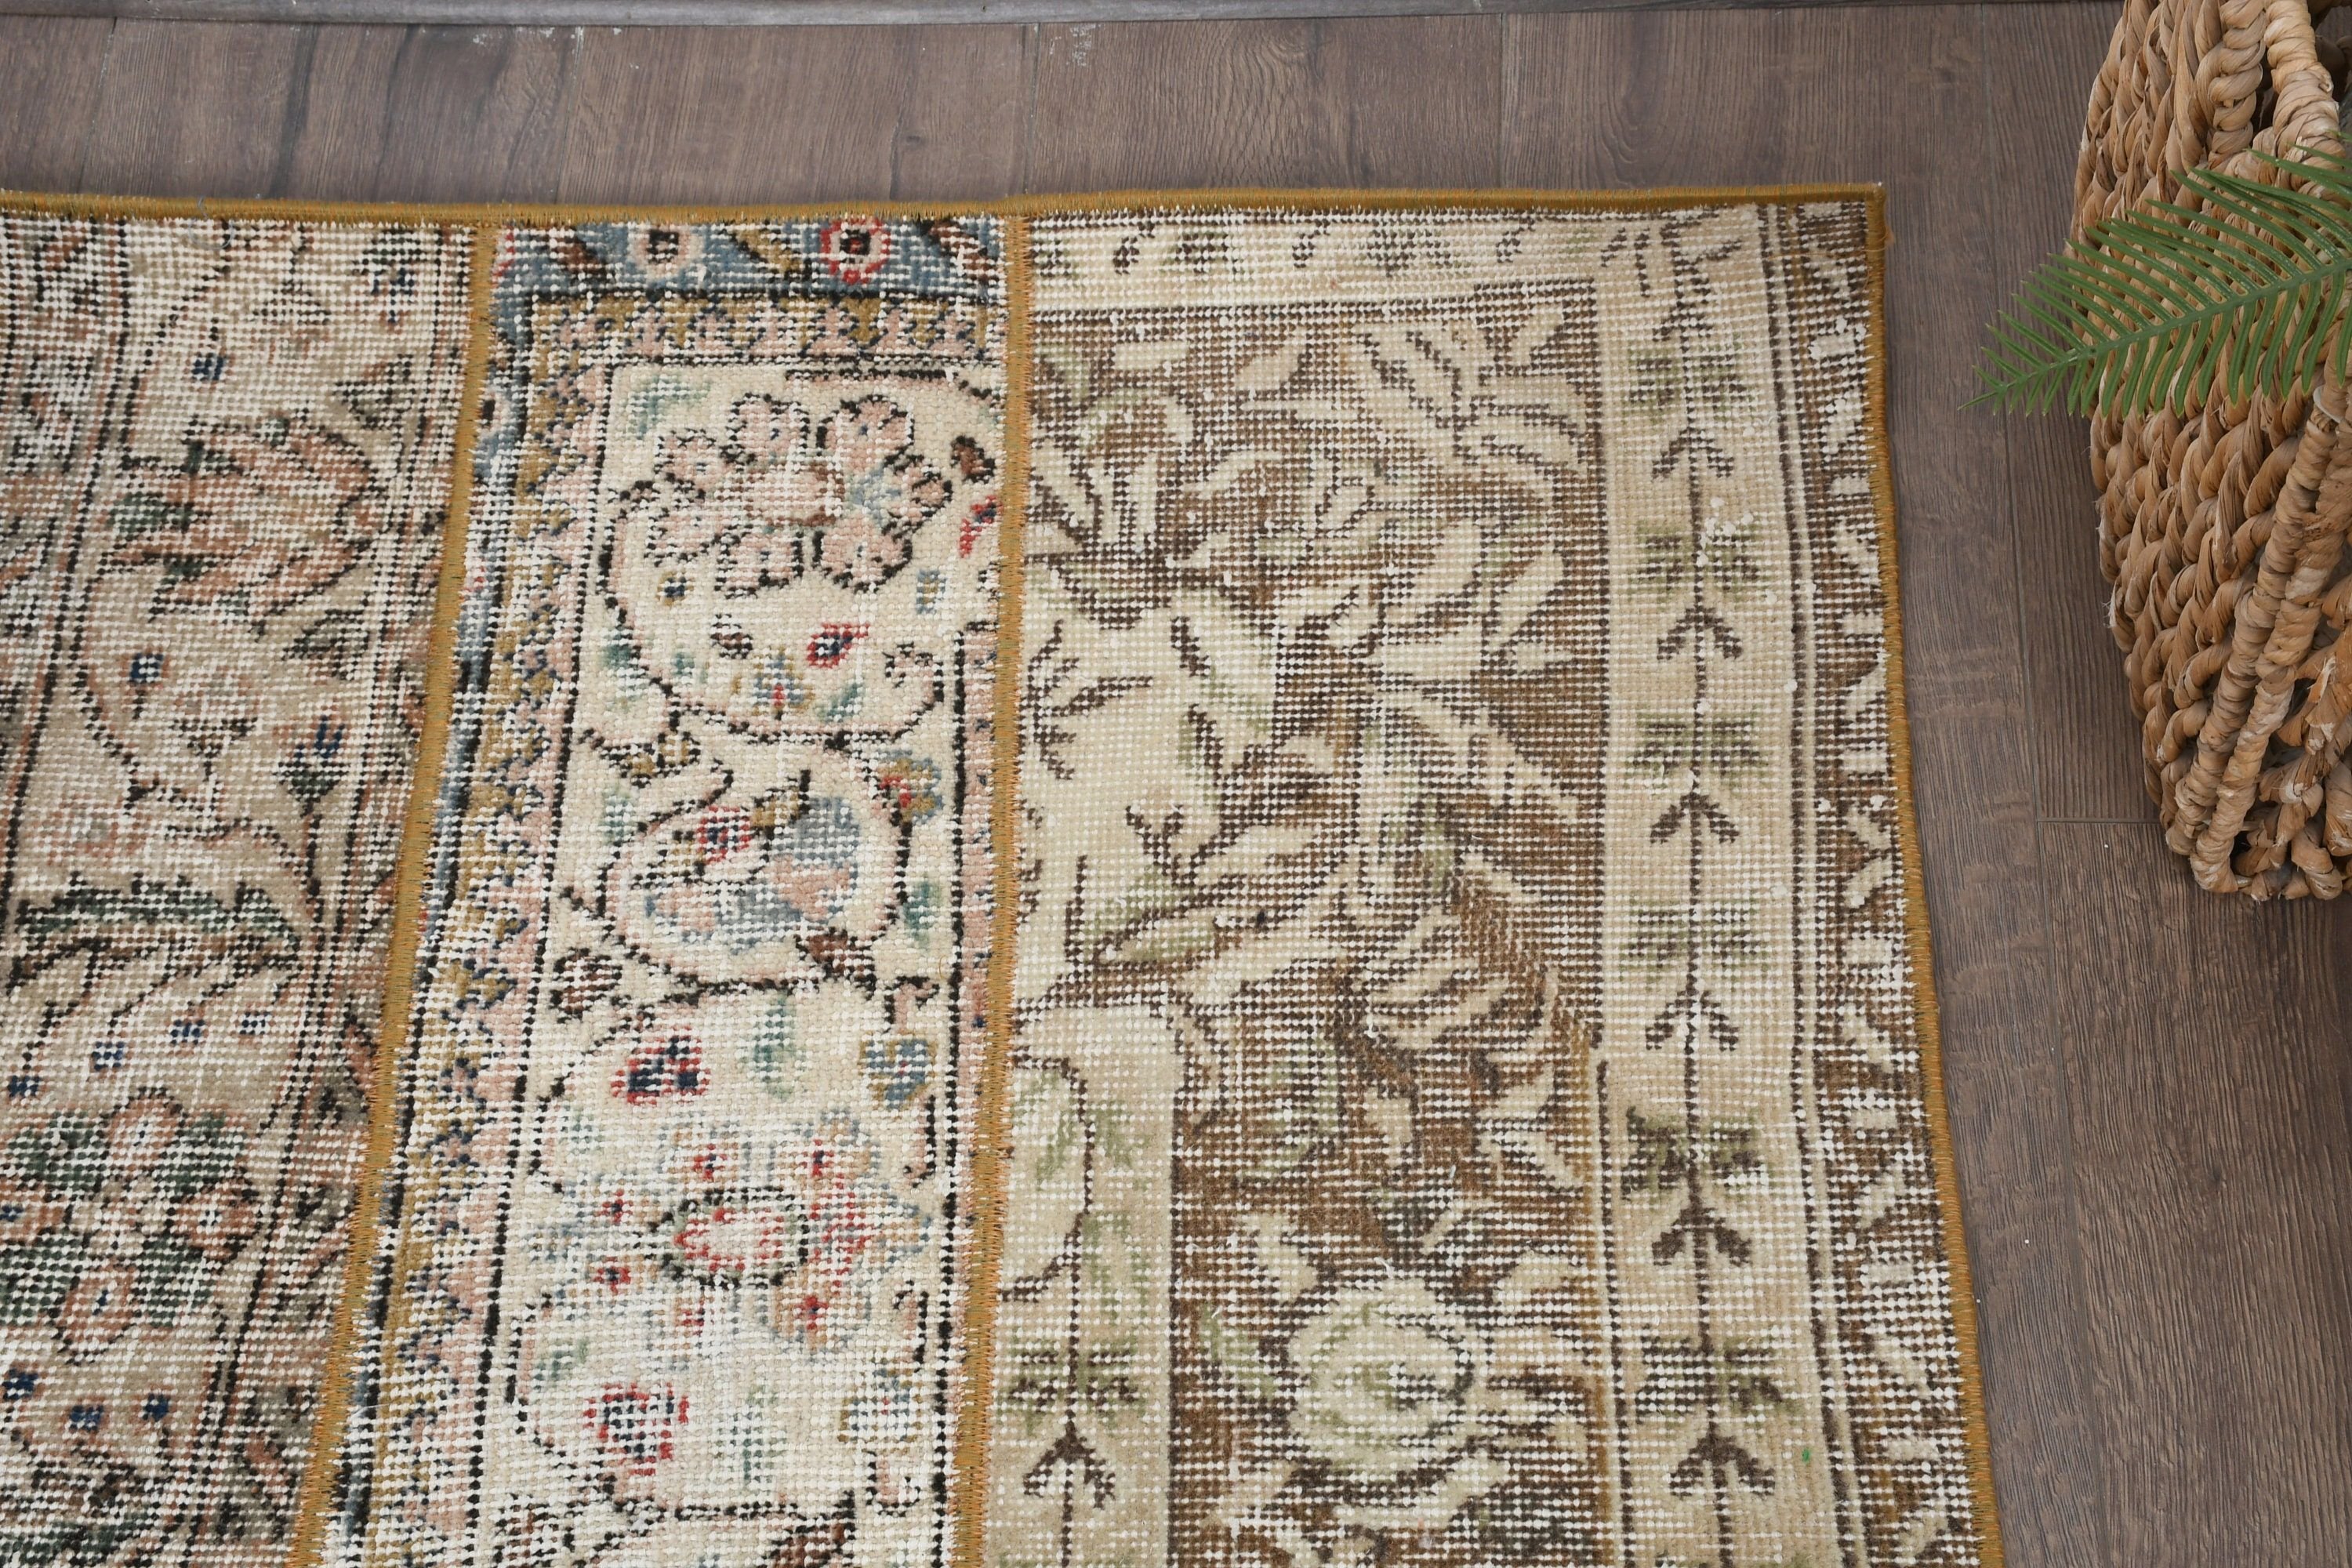 Turkish Rugs, Home Decor Rugs, Beige Moroccan Rugs, Entry Rugs, Kitchen Rug, 2.5x4.6 ft Small Rugs, Vintage Rugs, Pale Rugs, Wool Rug